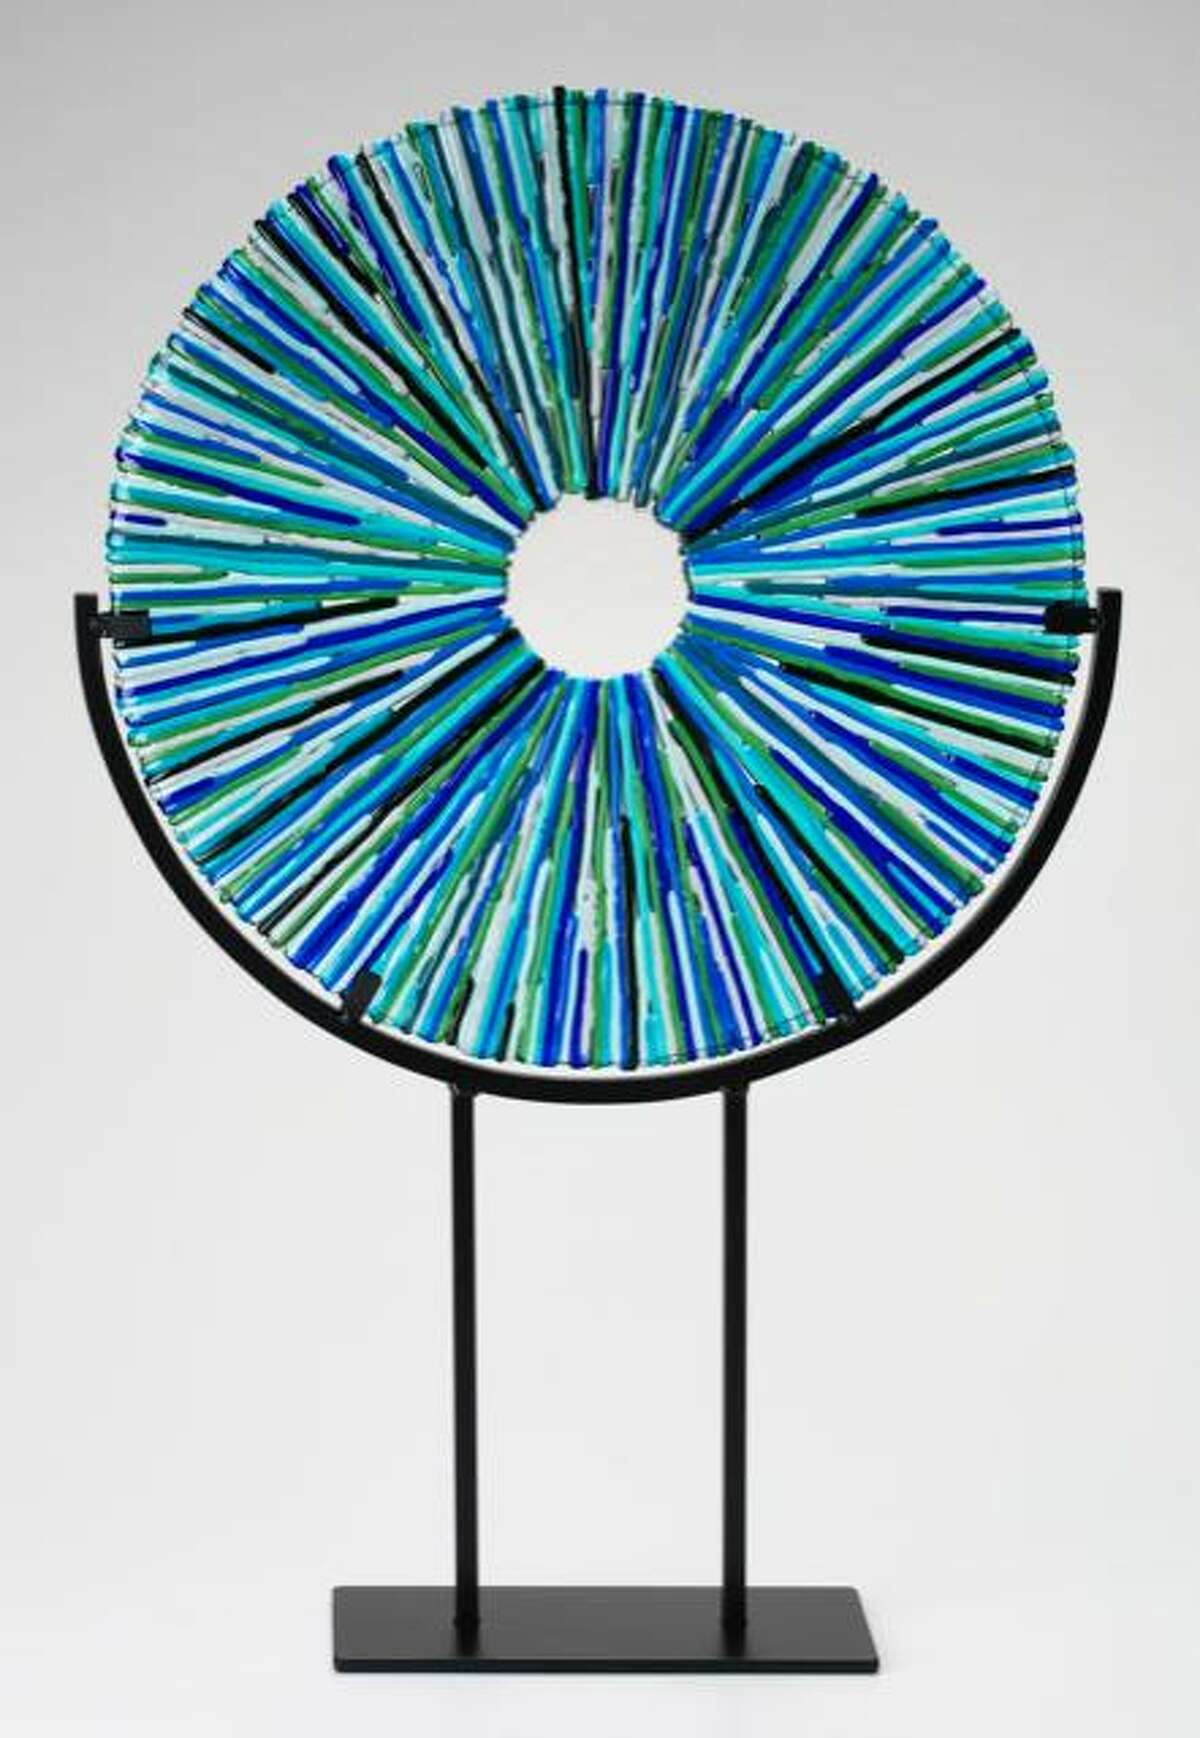 Middlesex Community College welcomes two artists this month in Middletown. Pictured, a fused glass sculpture by Becky Cook.